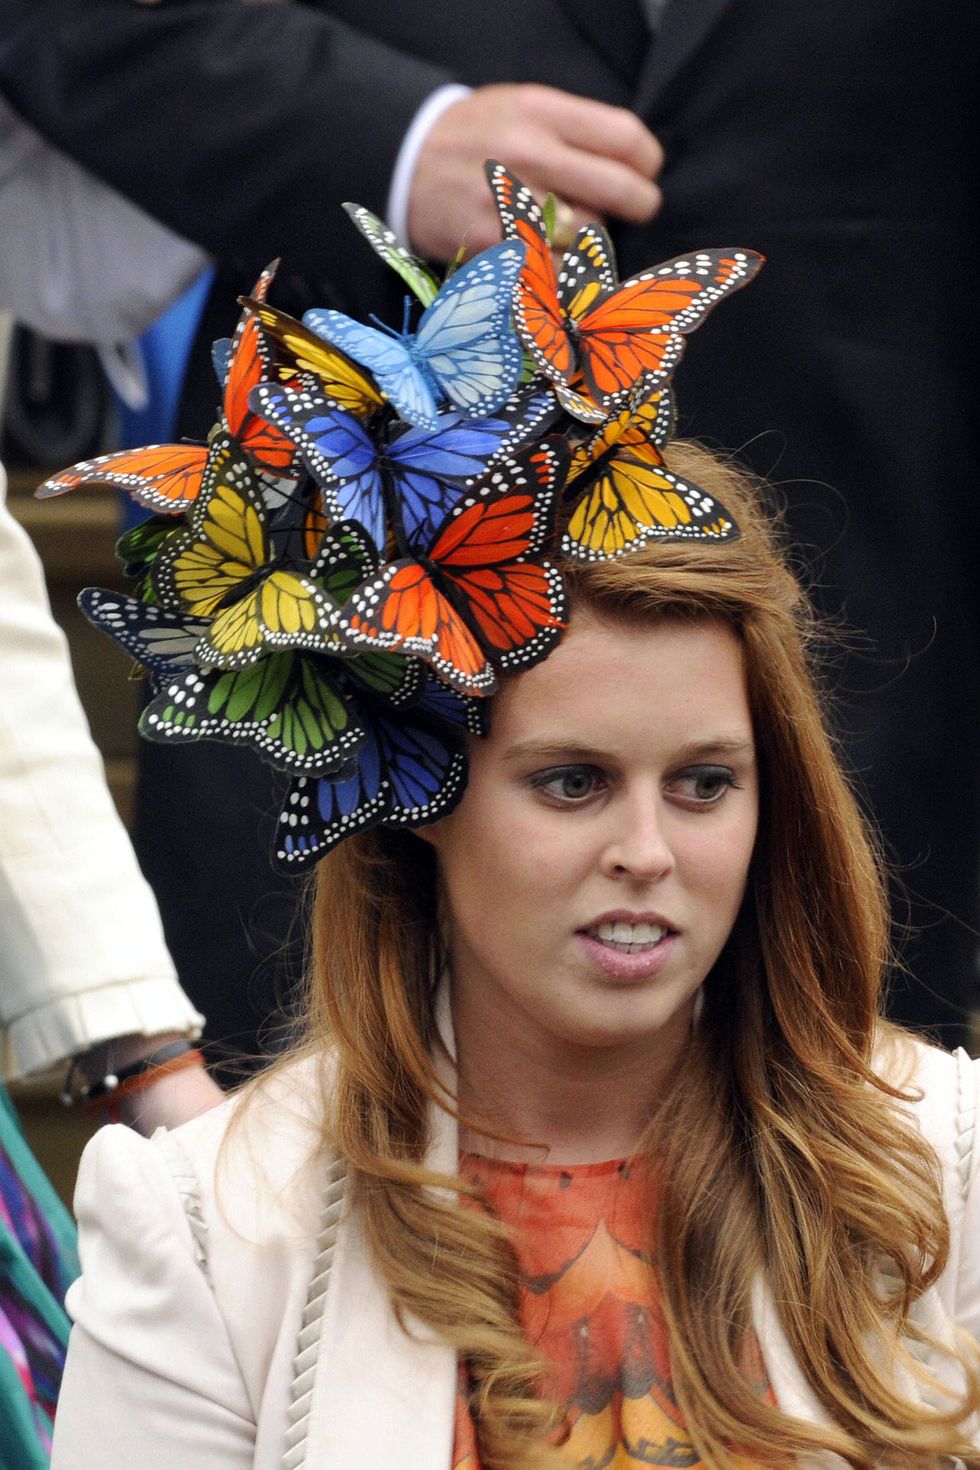 Clothing, Butterfly, Fashion, Headpiece, Monarch butterfly, Headgear, Fashion accessory, Hat, Hair accessory, Costume, 